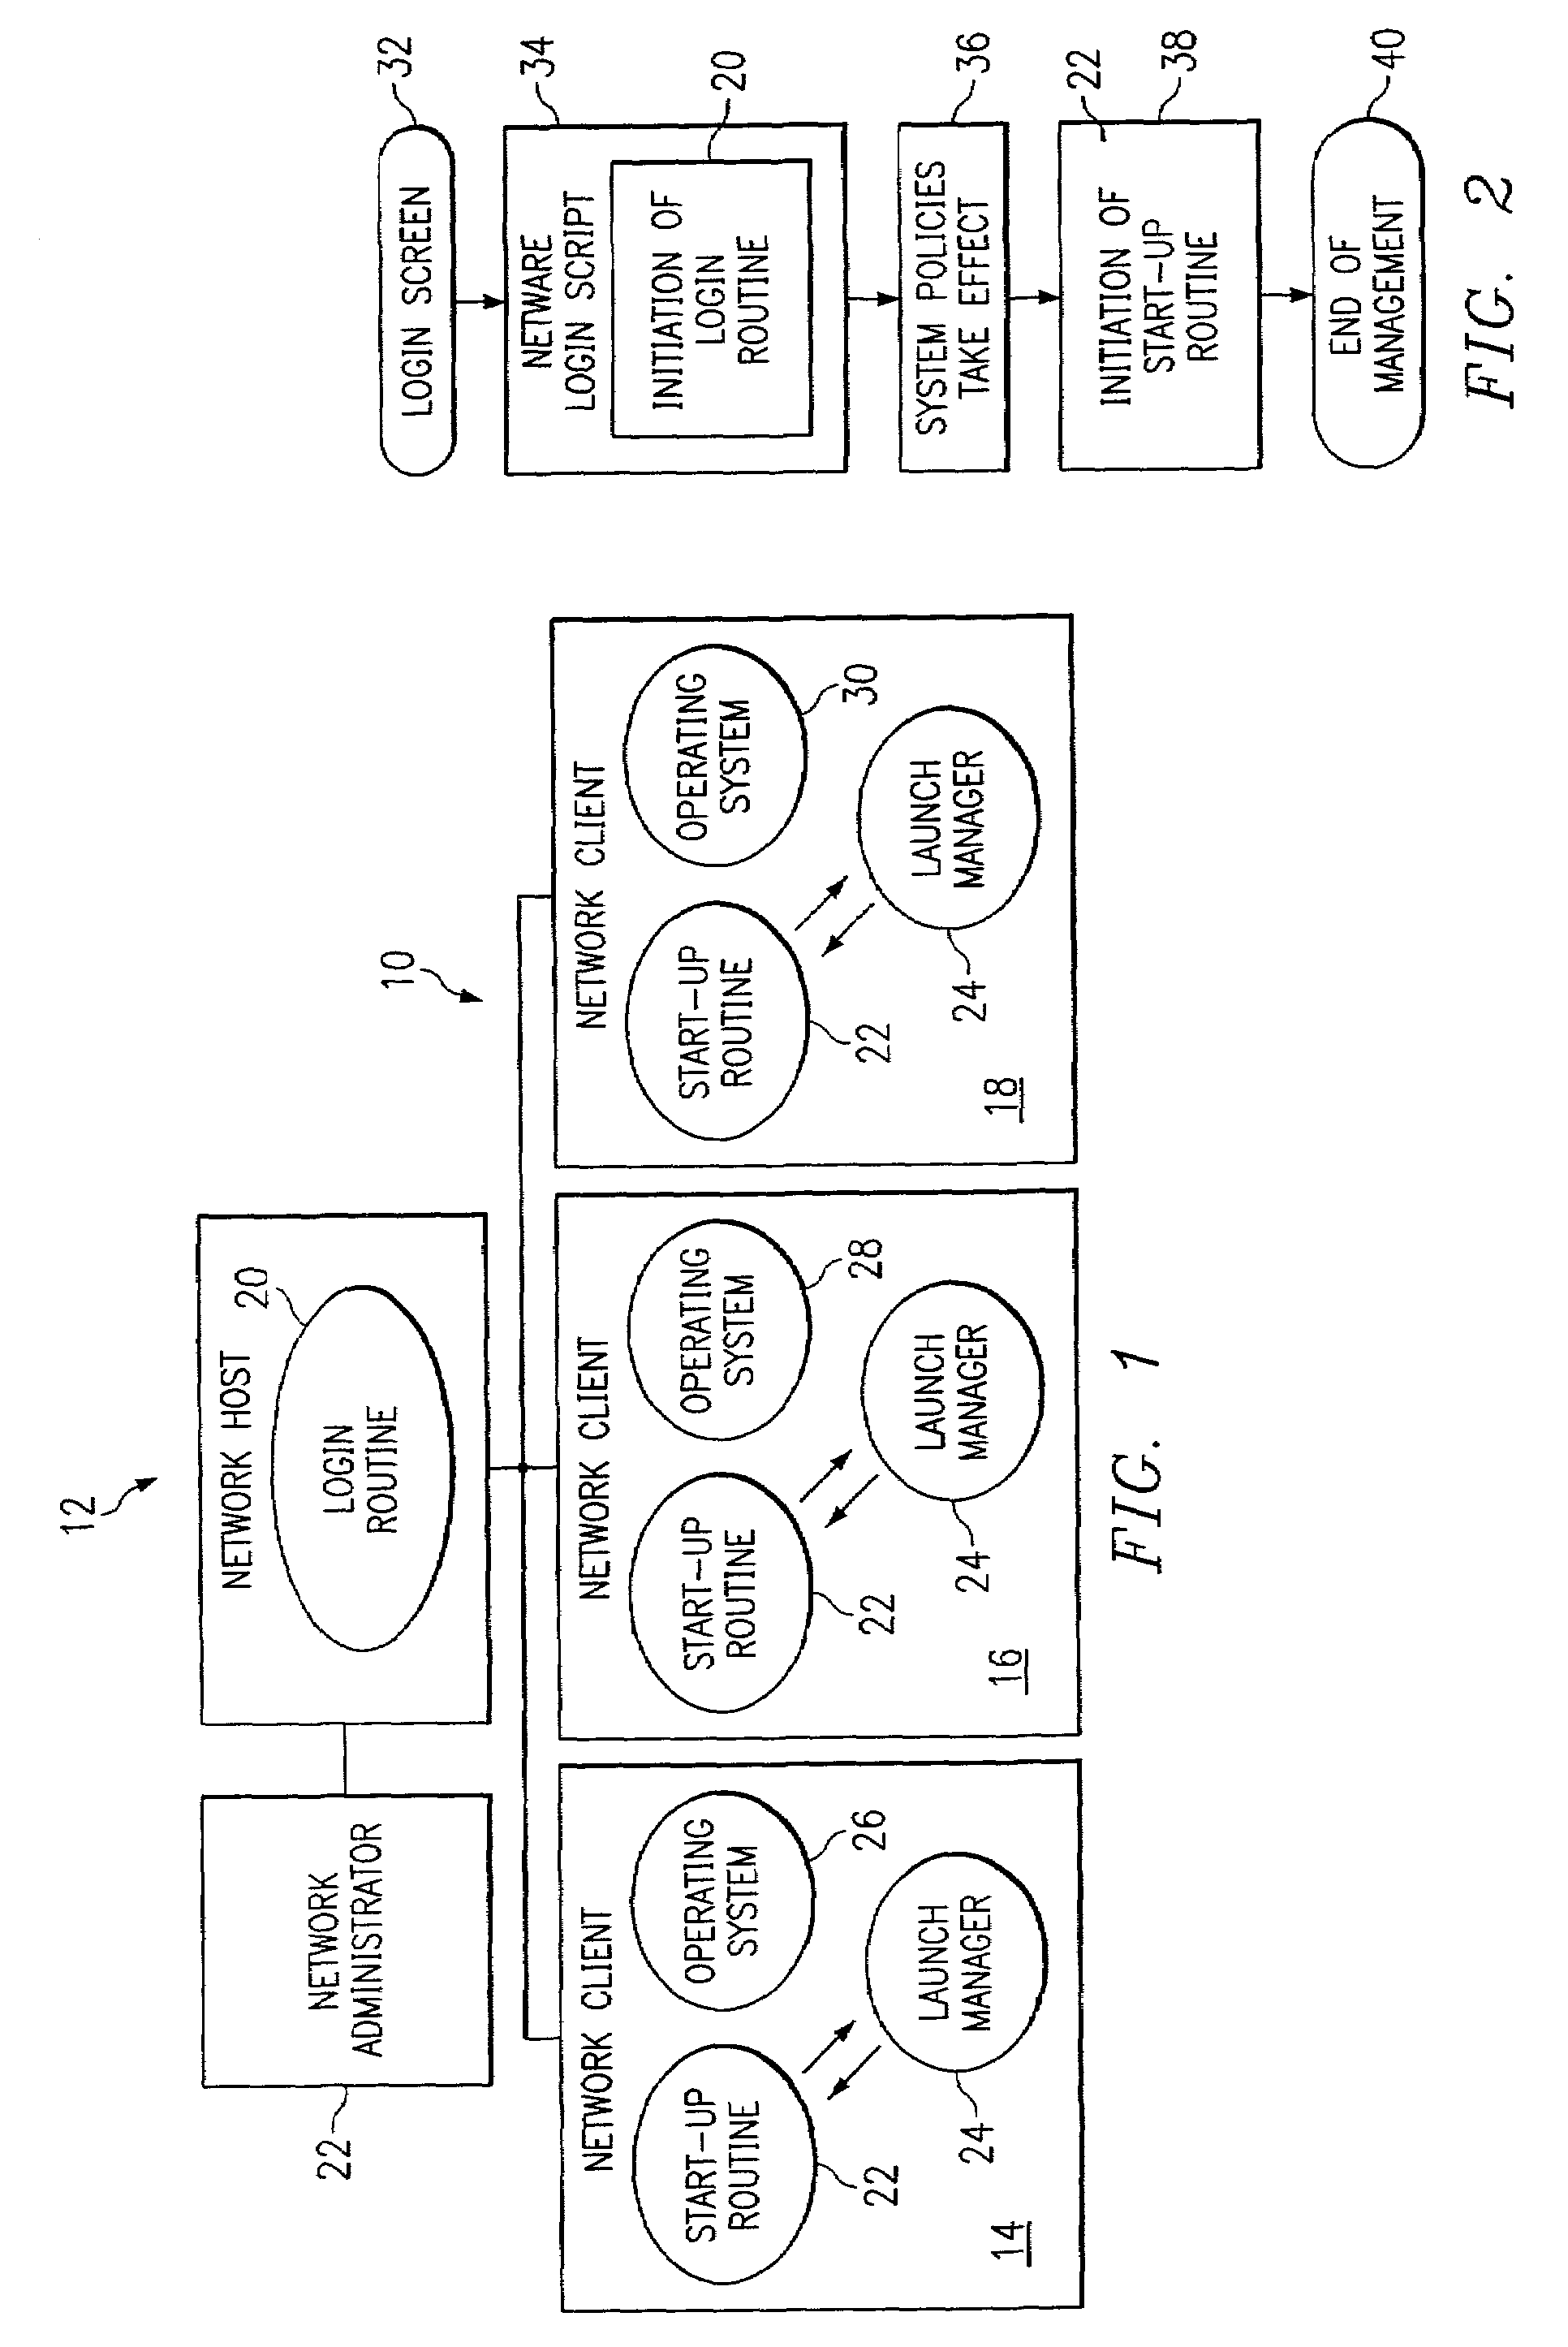 Method and system for central management of a computer network